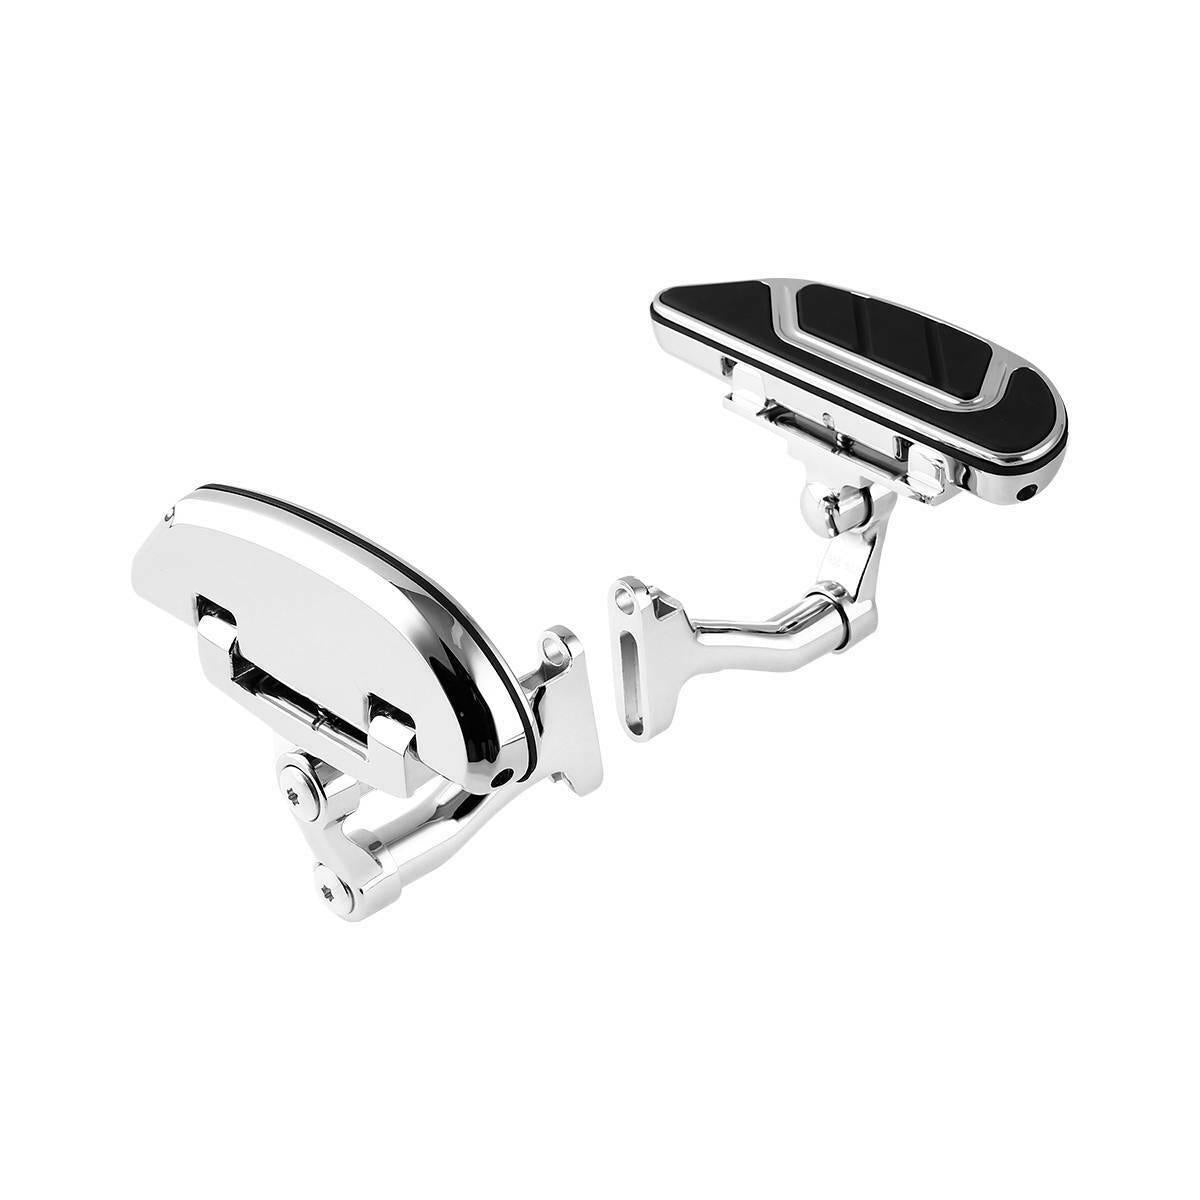 Rear Airflow Floorboard Footboard Bracket Fit For Harley Road King 1995-2021 - Moto Life Products